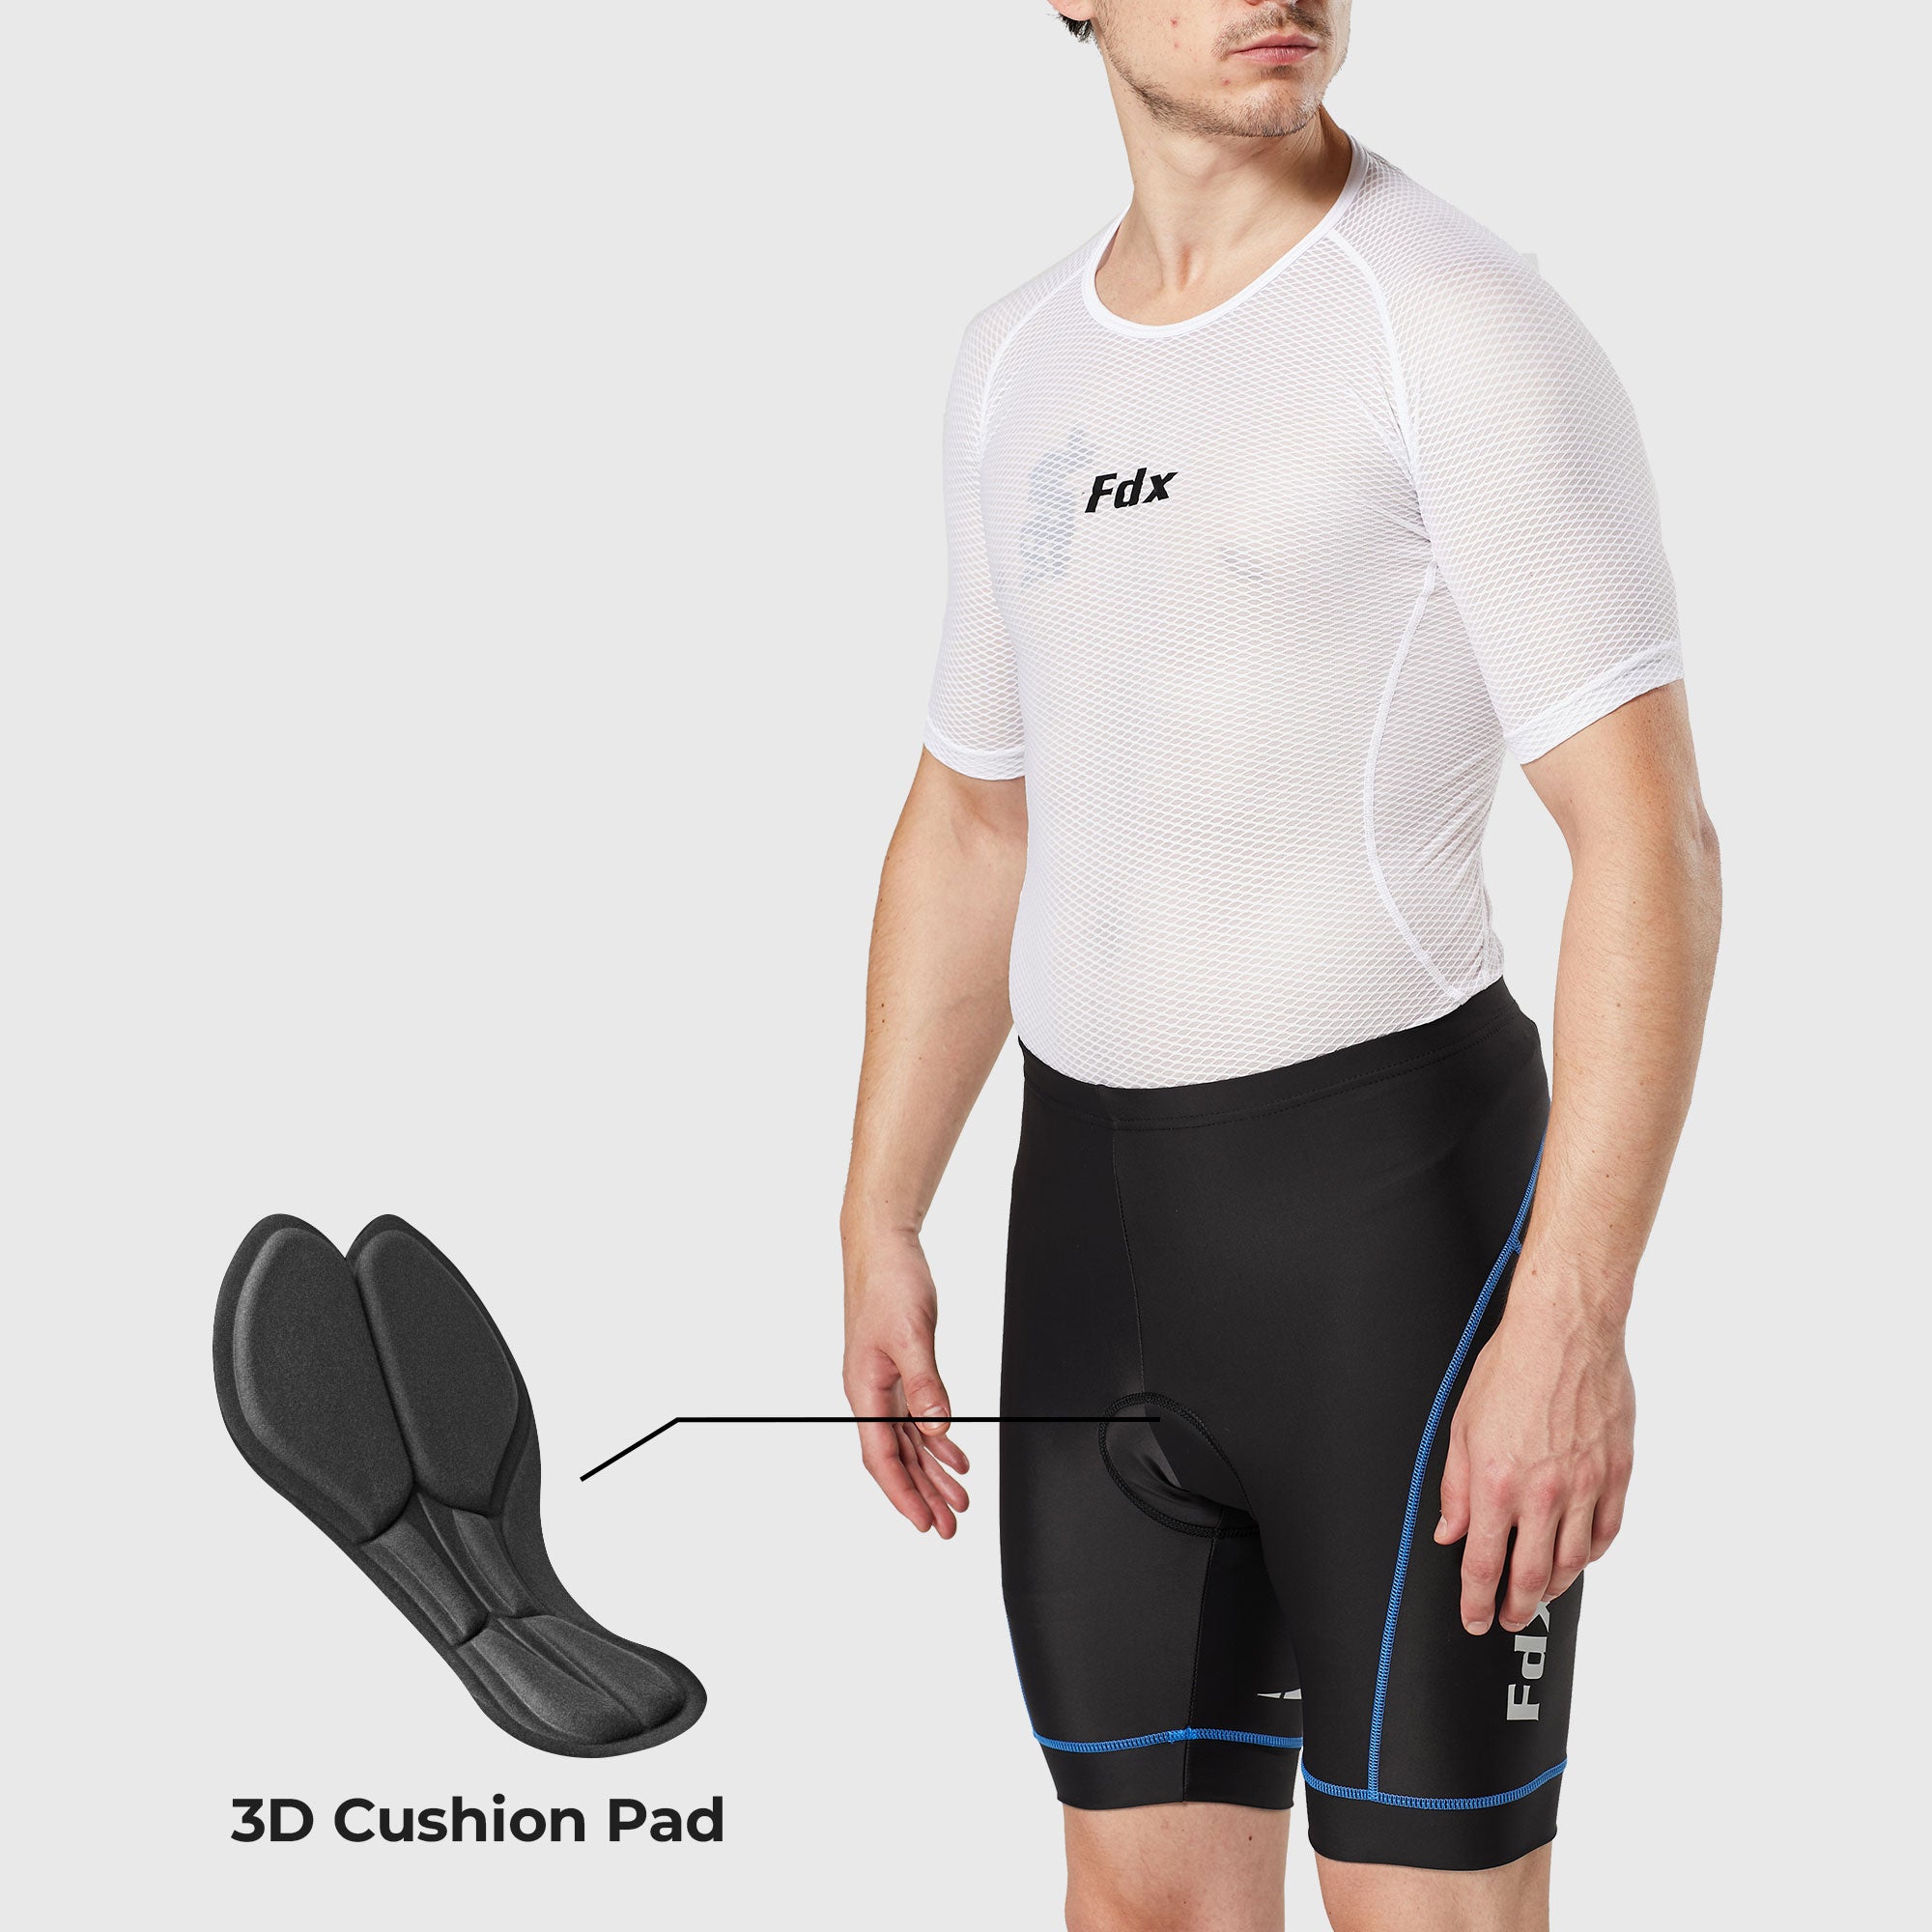 Fdx Men's Black & Blue Gel Padded Cycling Shorts for Summer Best Outdoor Knickers Road Bike Short Length Pants - Ridest